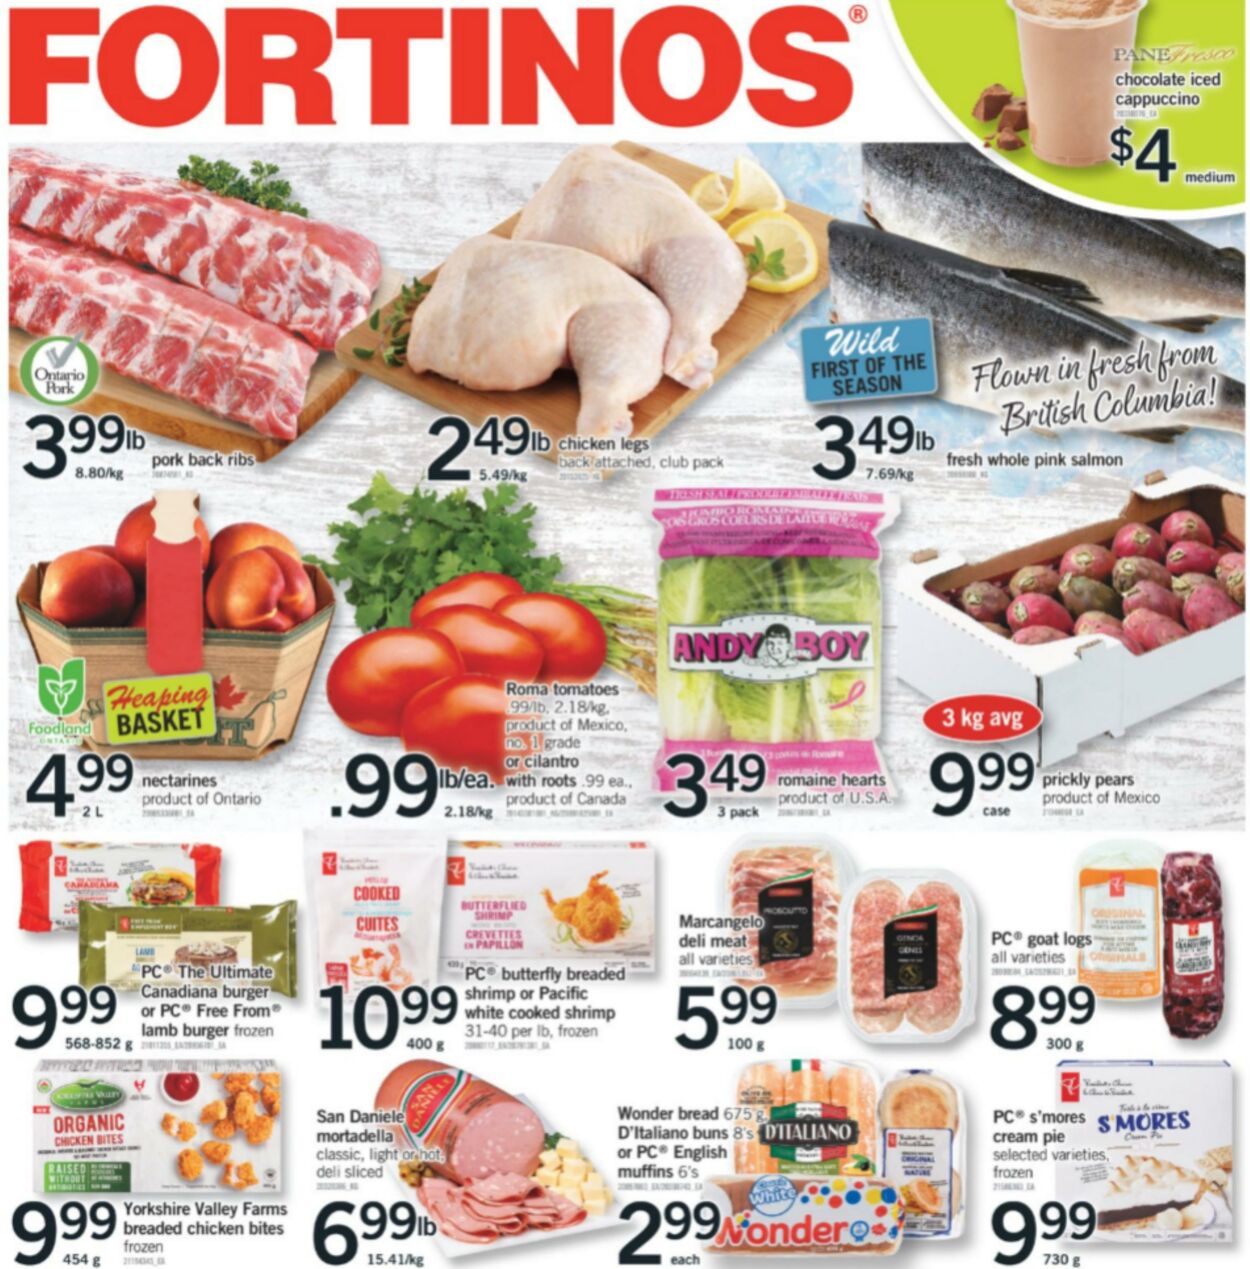 Fortinos Promotional flyers